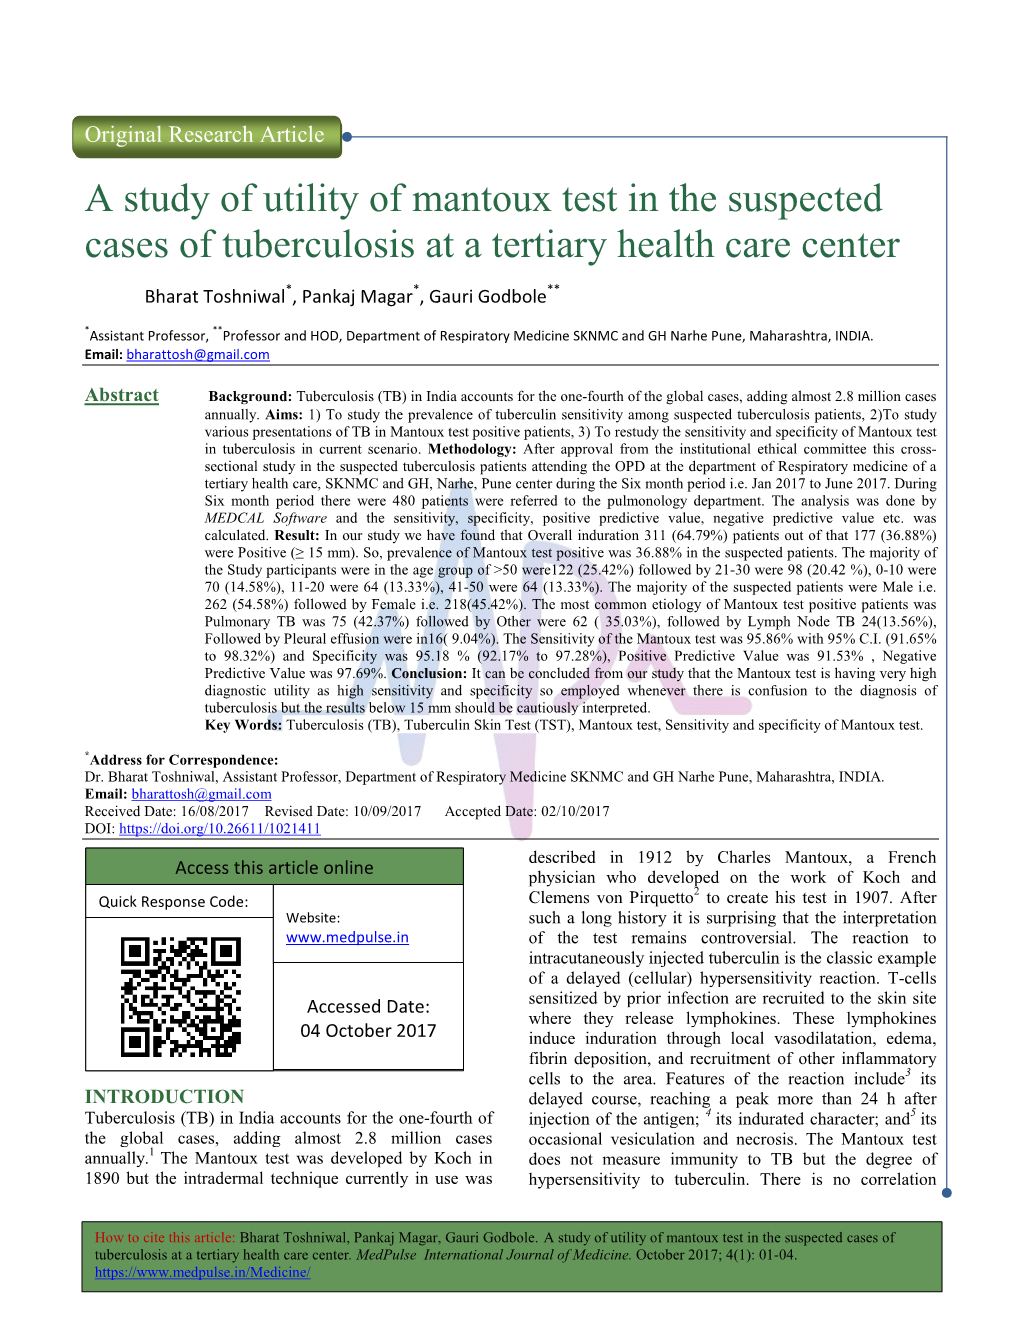 A Study of Utility of Mantoux Test in the Suspected Cases of Tuberculosis at a Tertiary Health Care Center